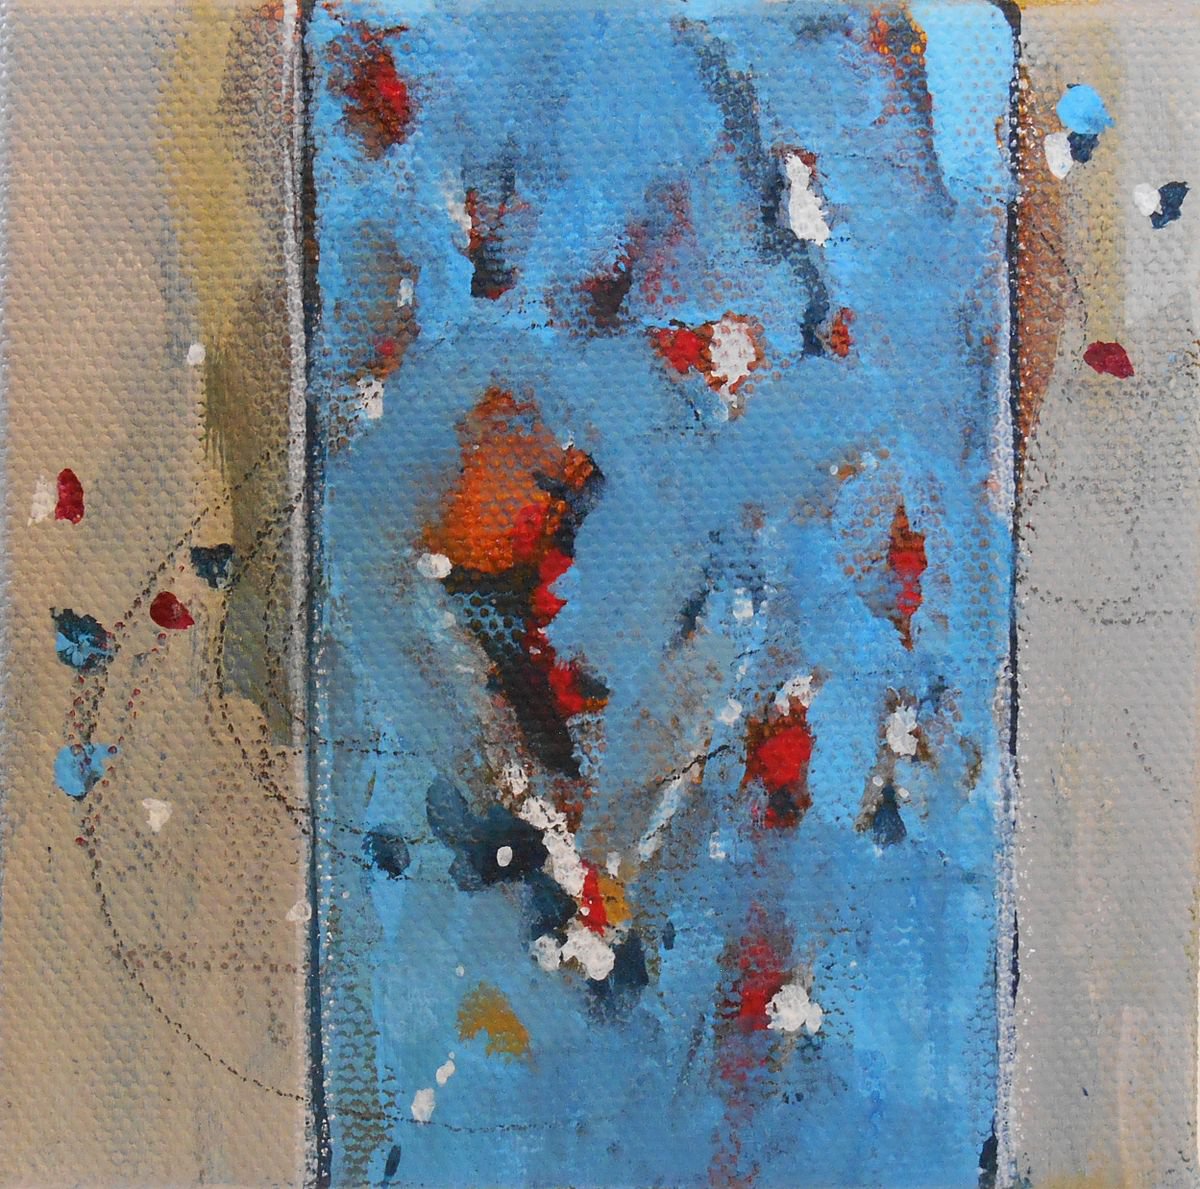 Alive - Abstract Art - 4 x 4 IN / 10 x 10 CM - Mini Abstract Oil Painting on Canvas, Ready... by Cynthia Ligeros